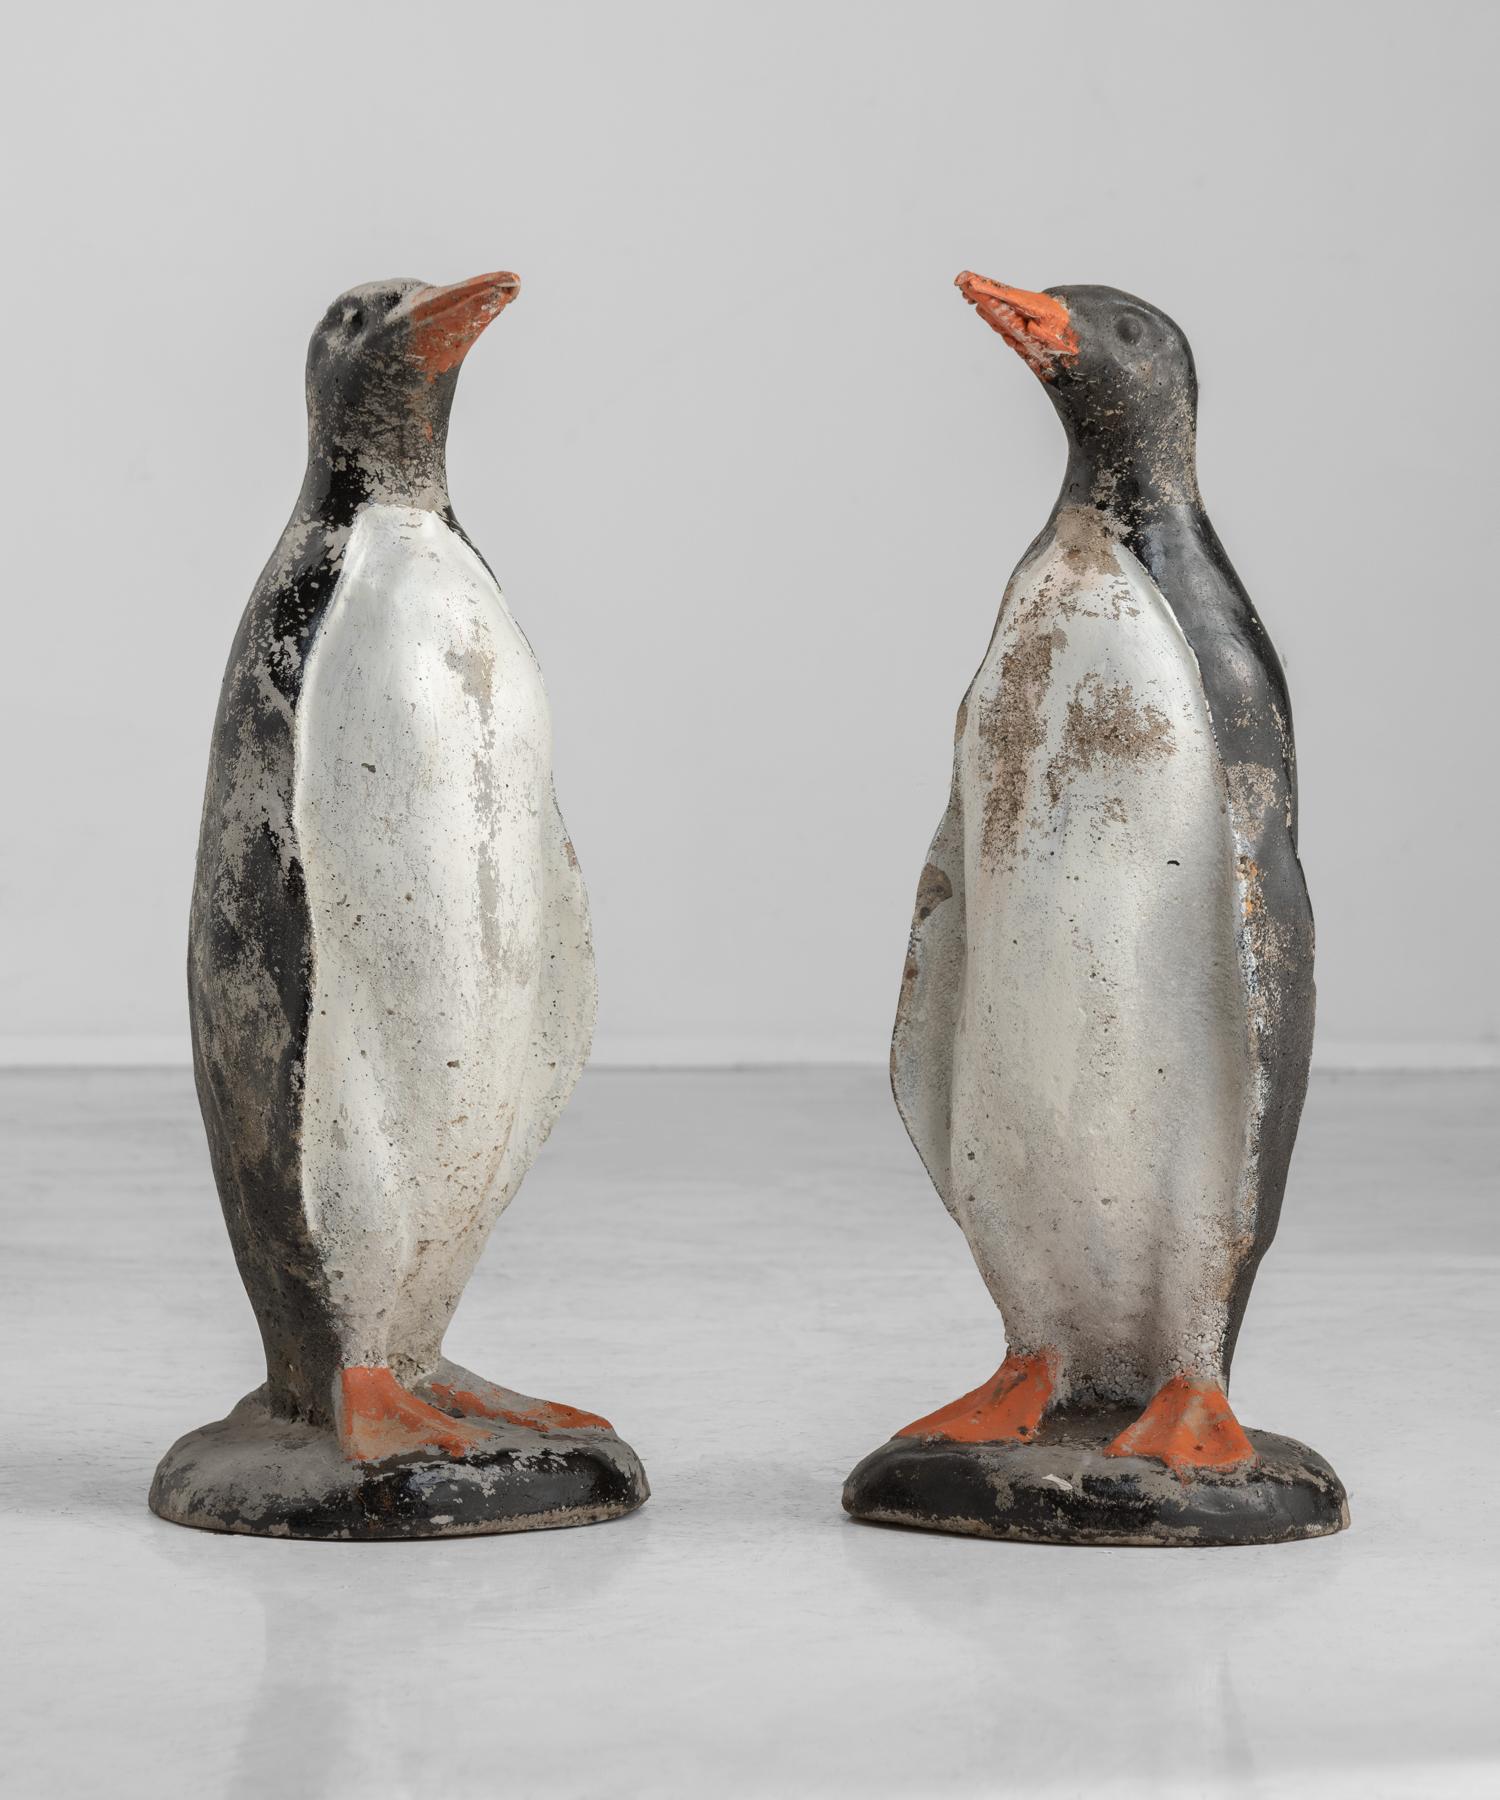 Composite stone penguin, circa 1950

Hand-painted with beautiful patina.